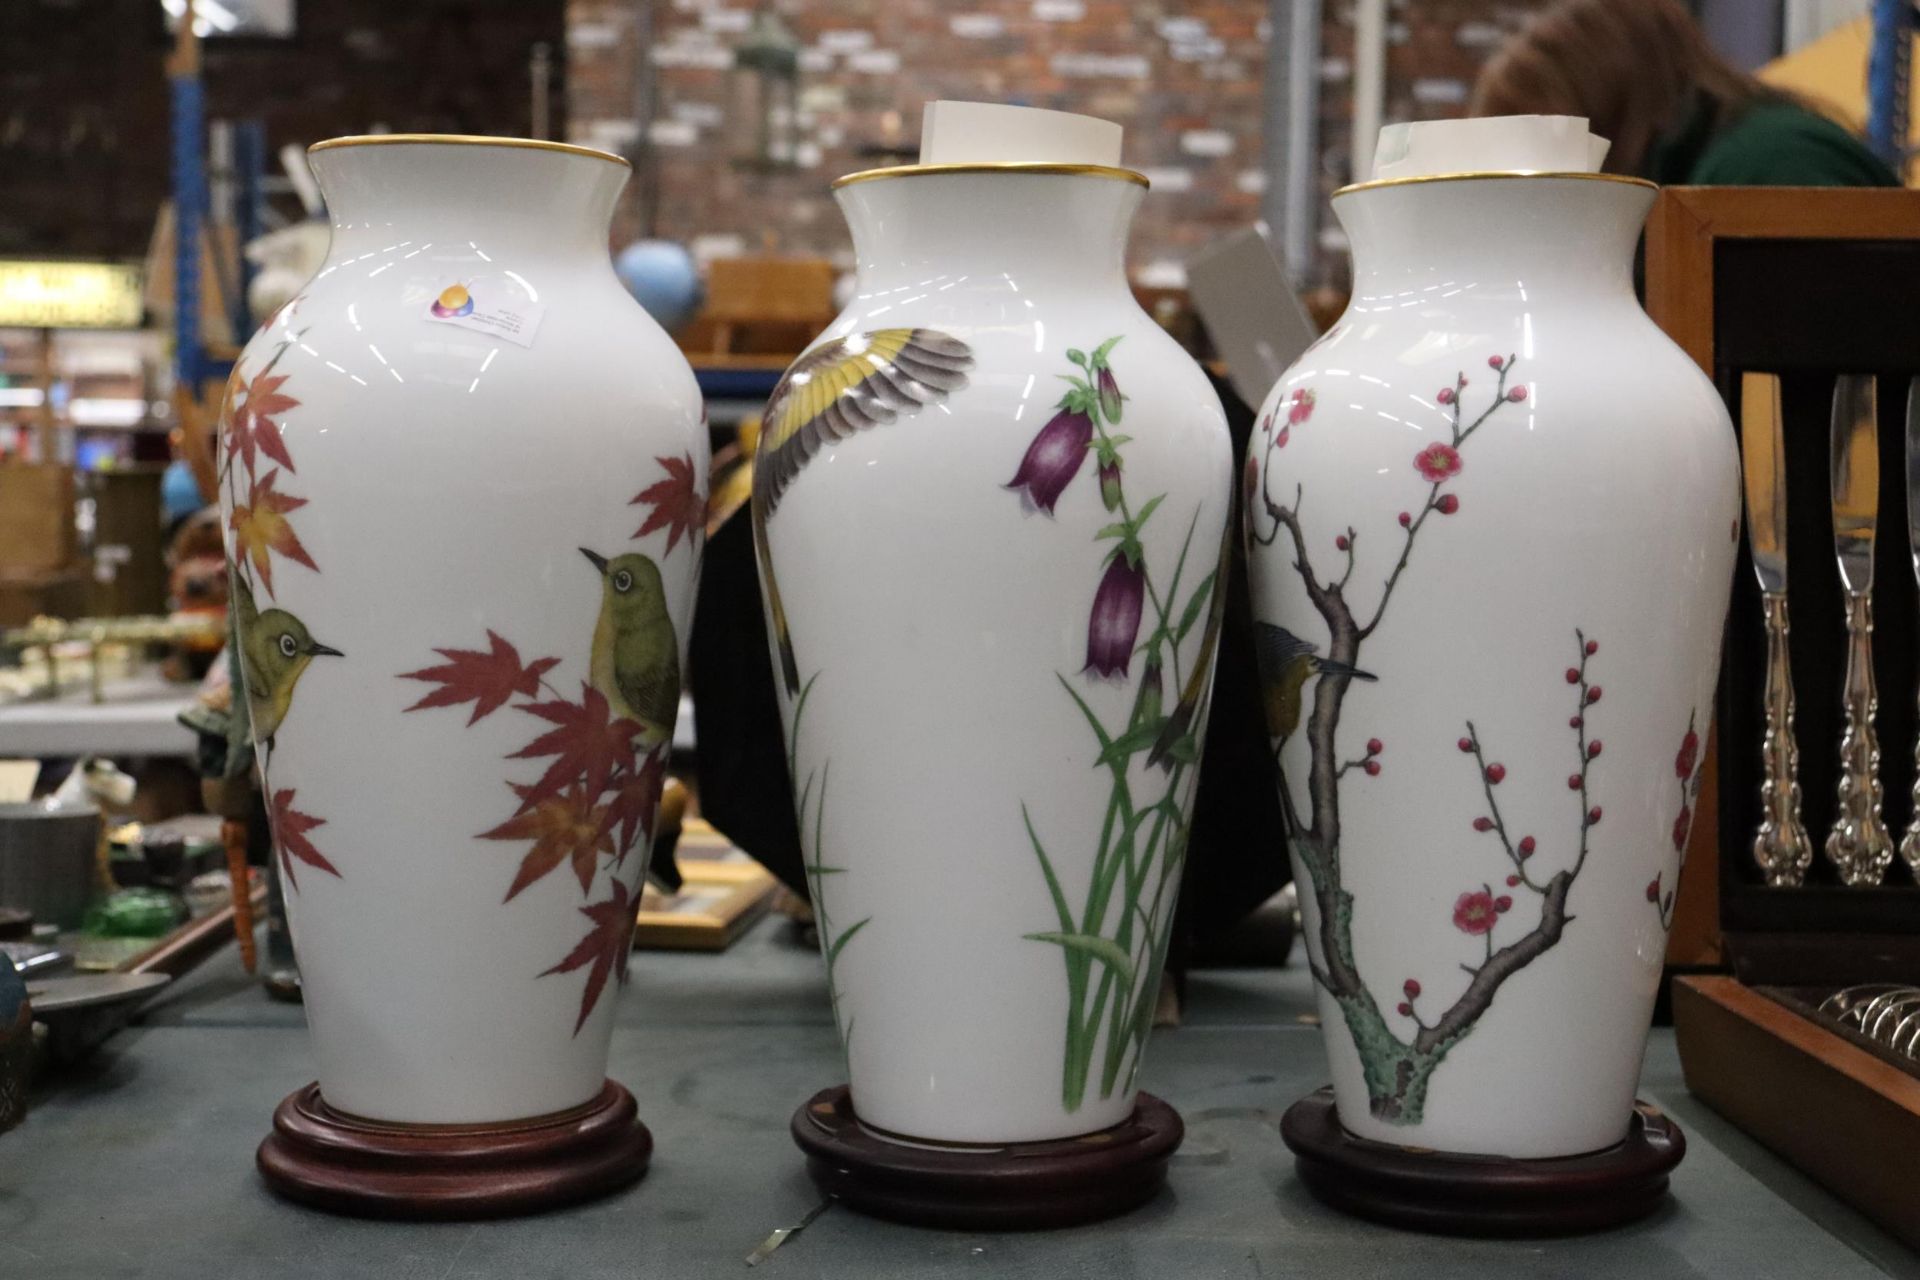 THREE LARGE FRANKLIN PORCELAIN VASES WITH JAPANESE CHARACTERS TO BASE AND WOODEN STANDS, THE HERALDS - Image 5 of 7